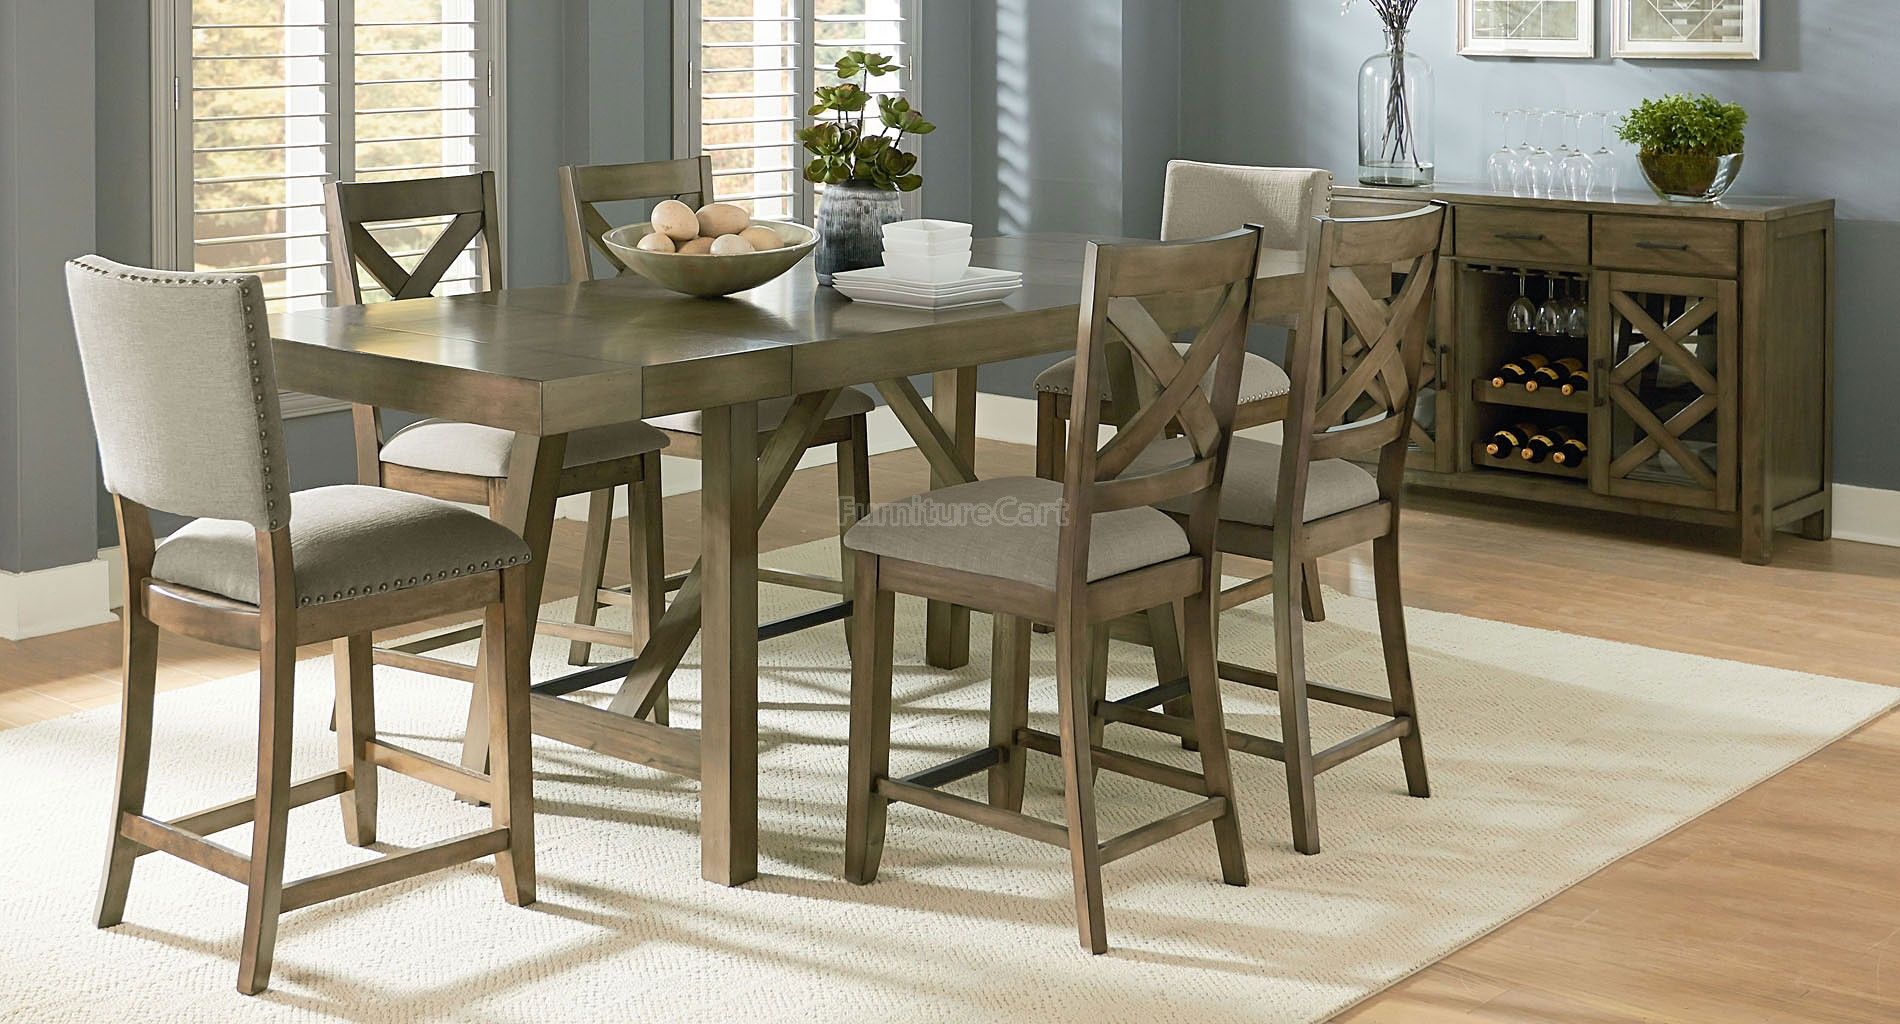 Omaha Counter Height Dining Set W/ Chair Choices (Grey In Best And Newest Avondale Counter Height Dining Tables (View 9 of 25)